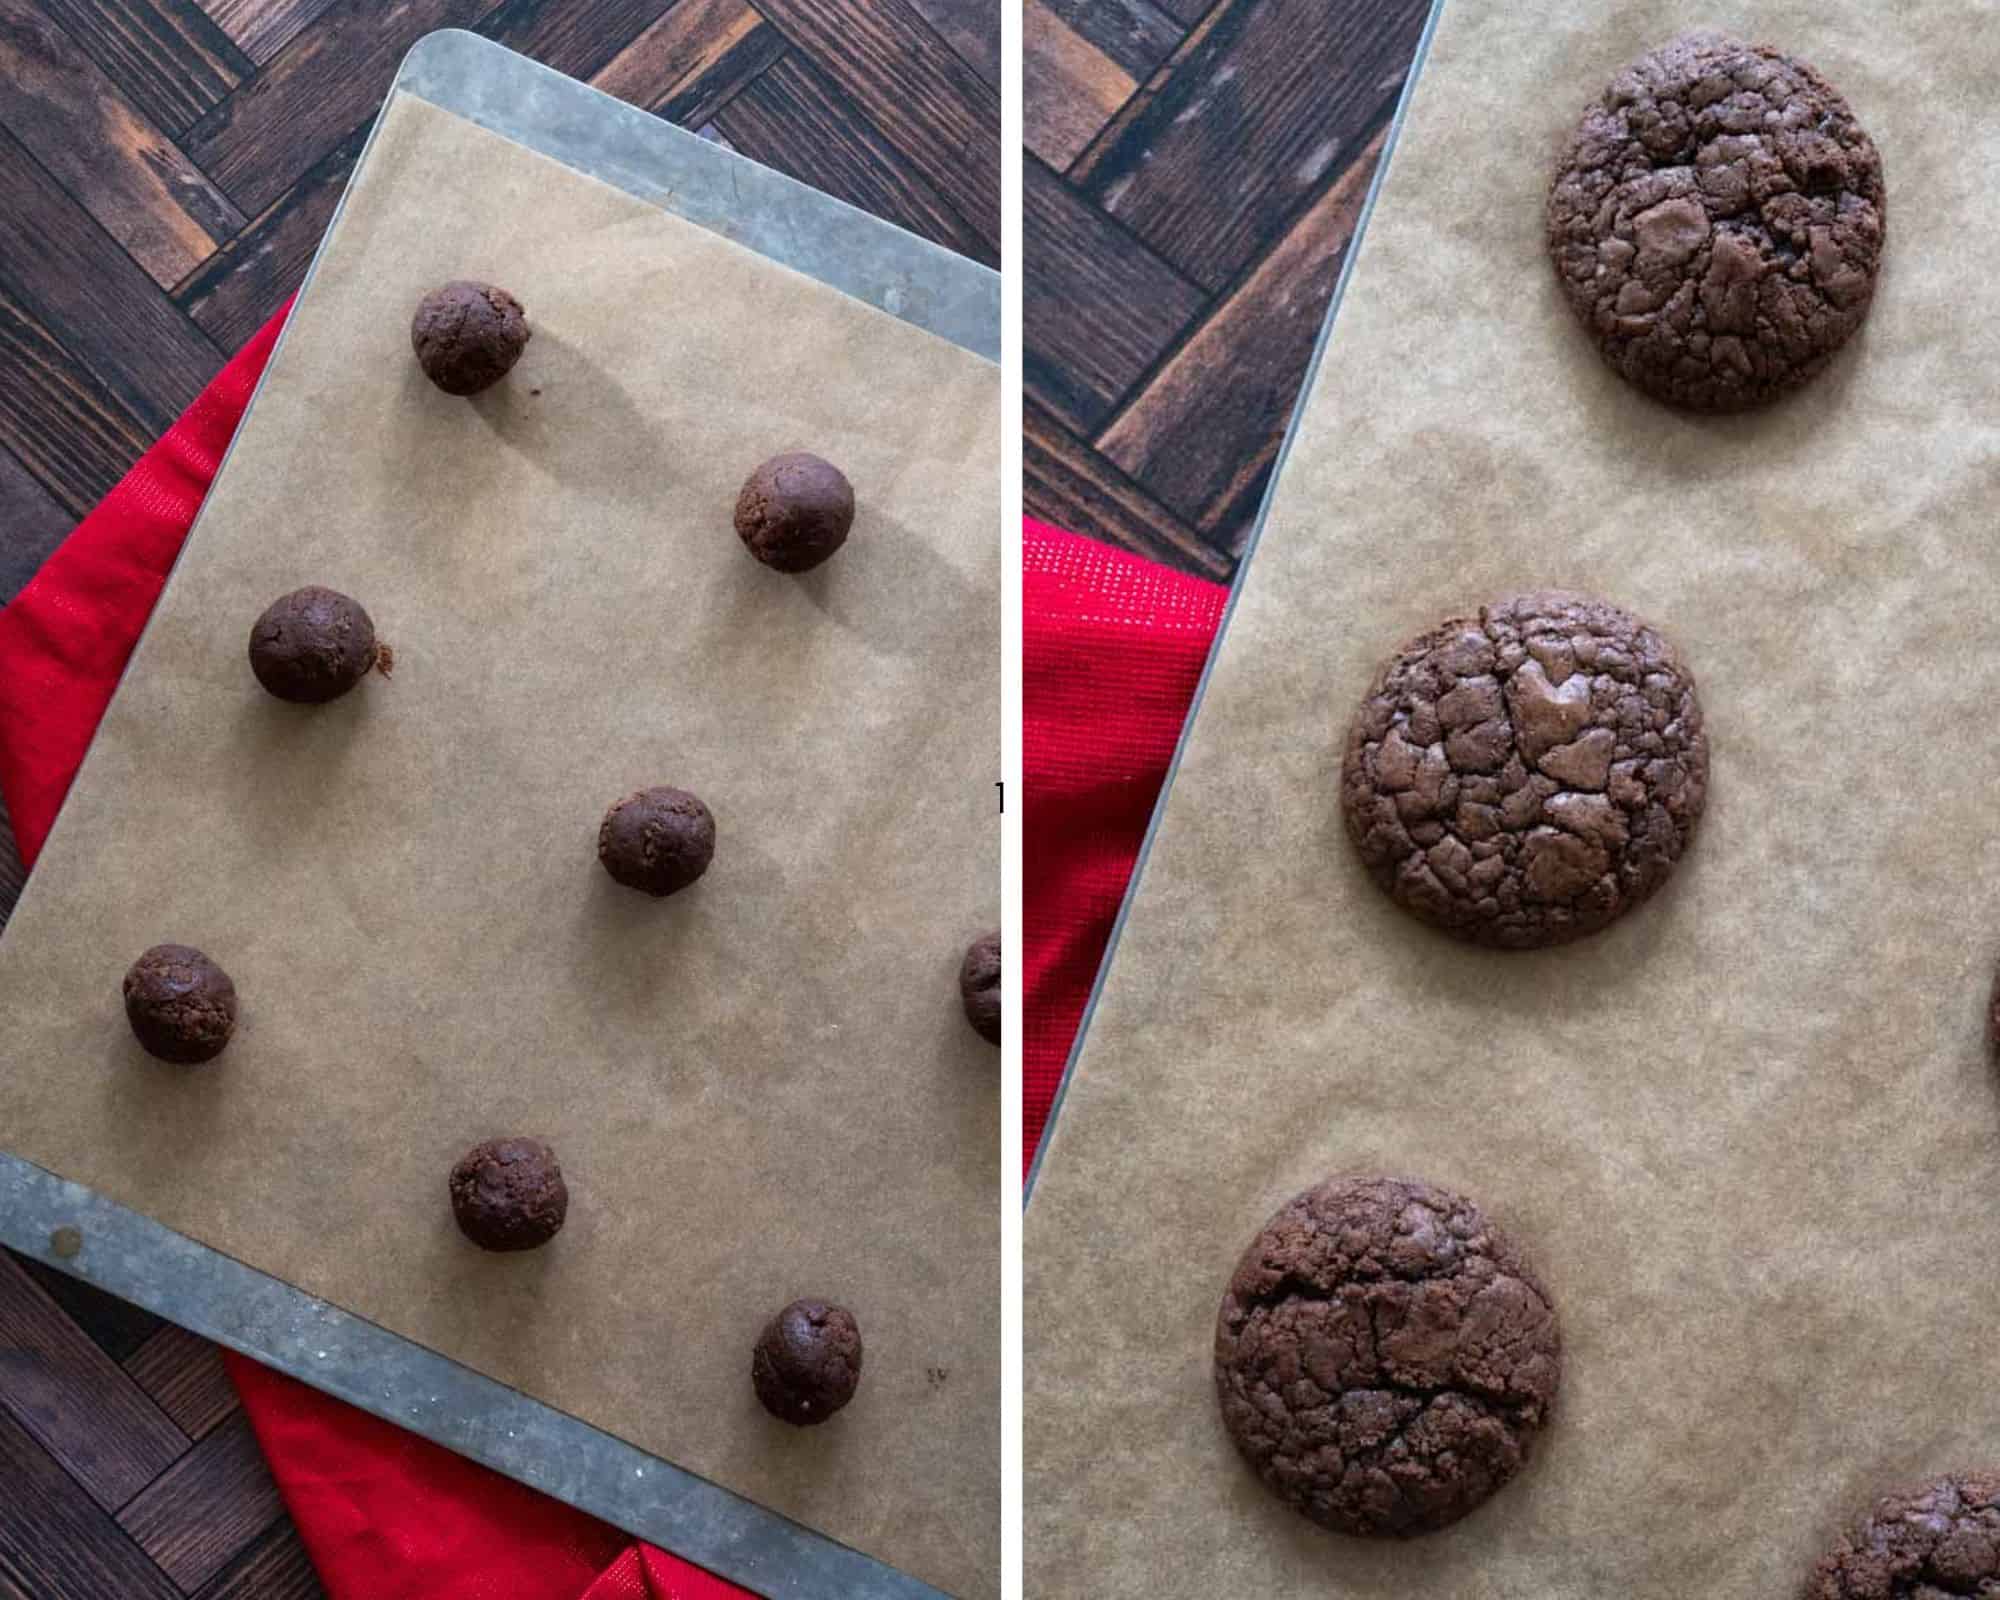 Two part collage showing balls of dough on baking sheet and freshly baked cookies on the right. 